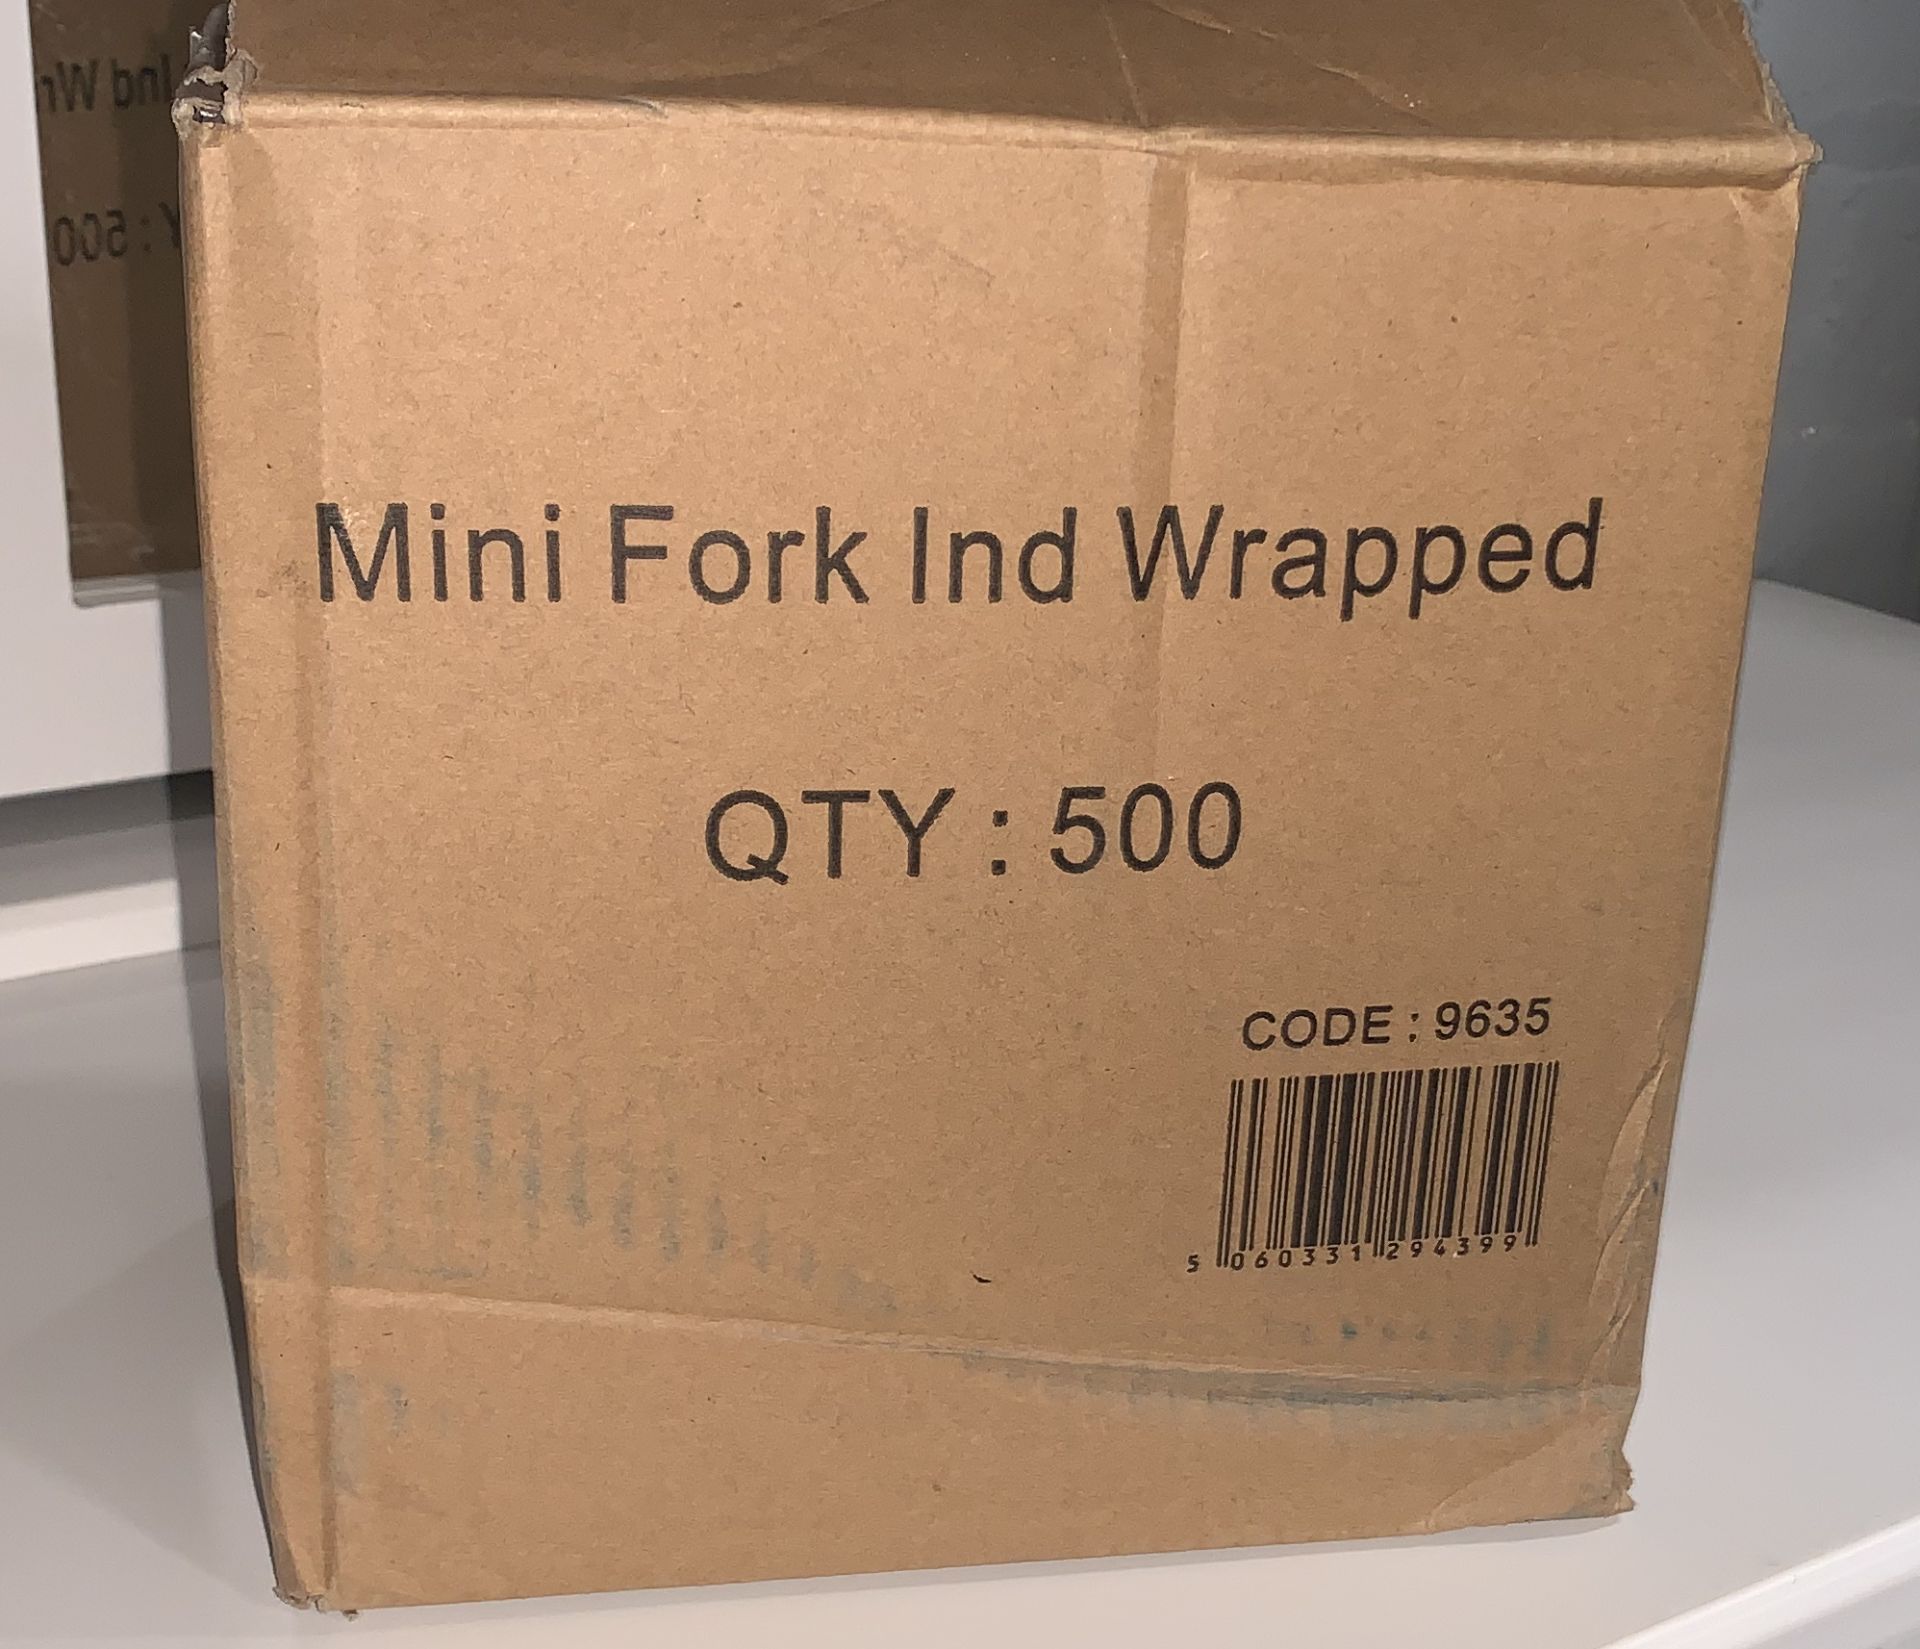 5 x Boxes of 500 Mini Forks by 888 Gastro Disposables - Image 3 of 3